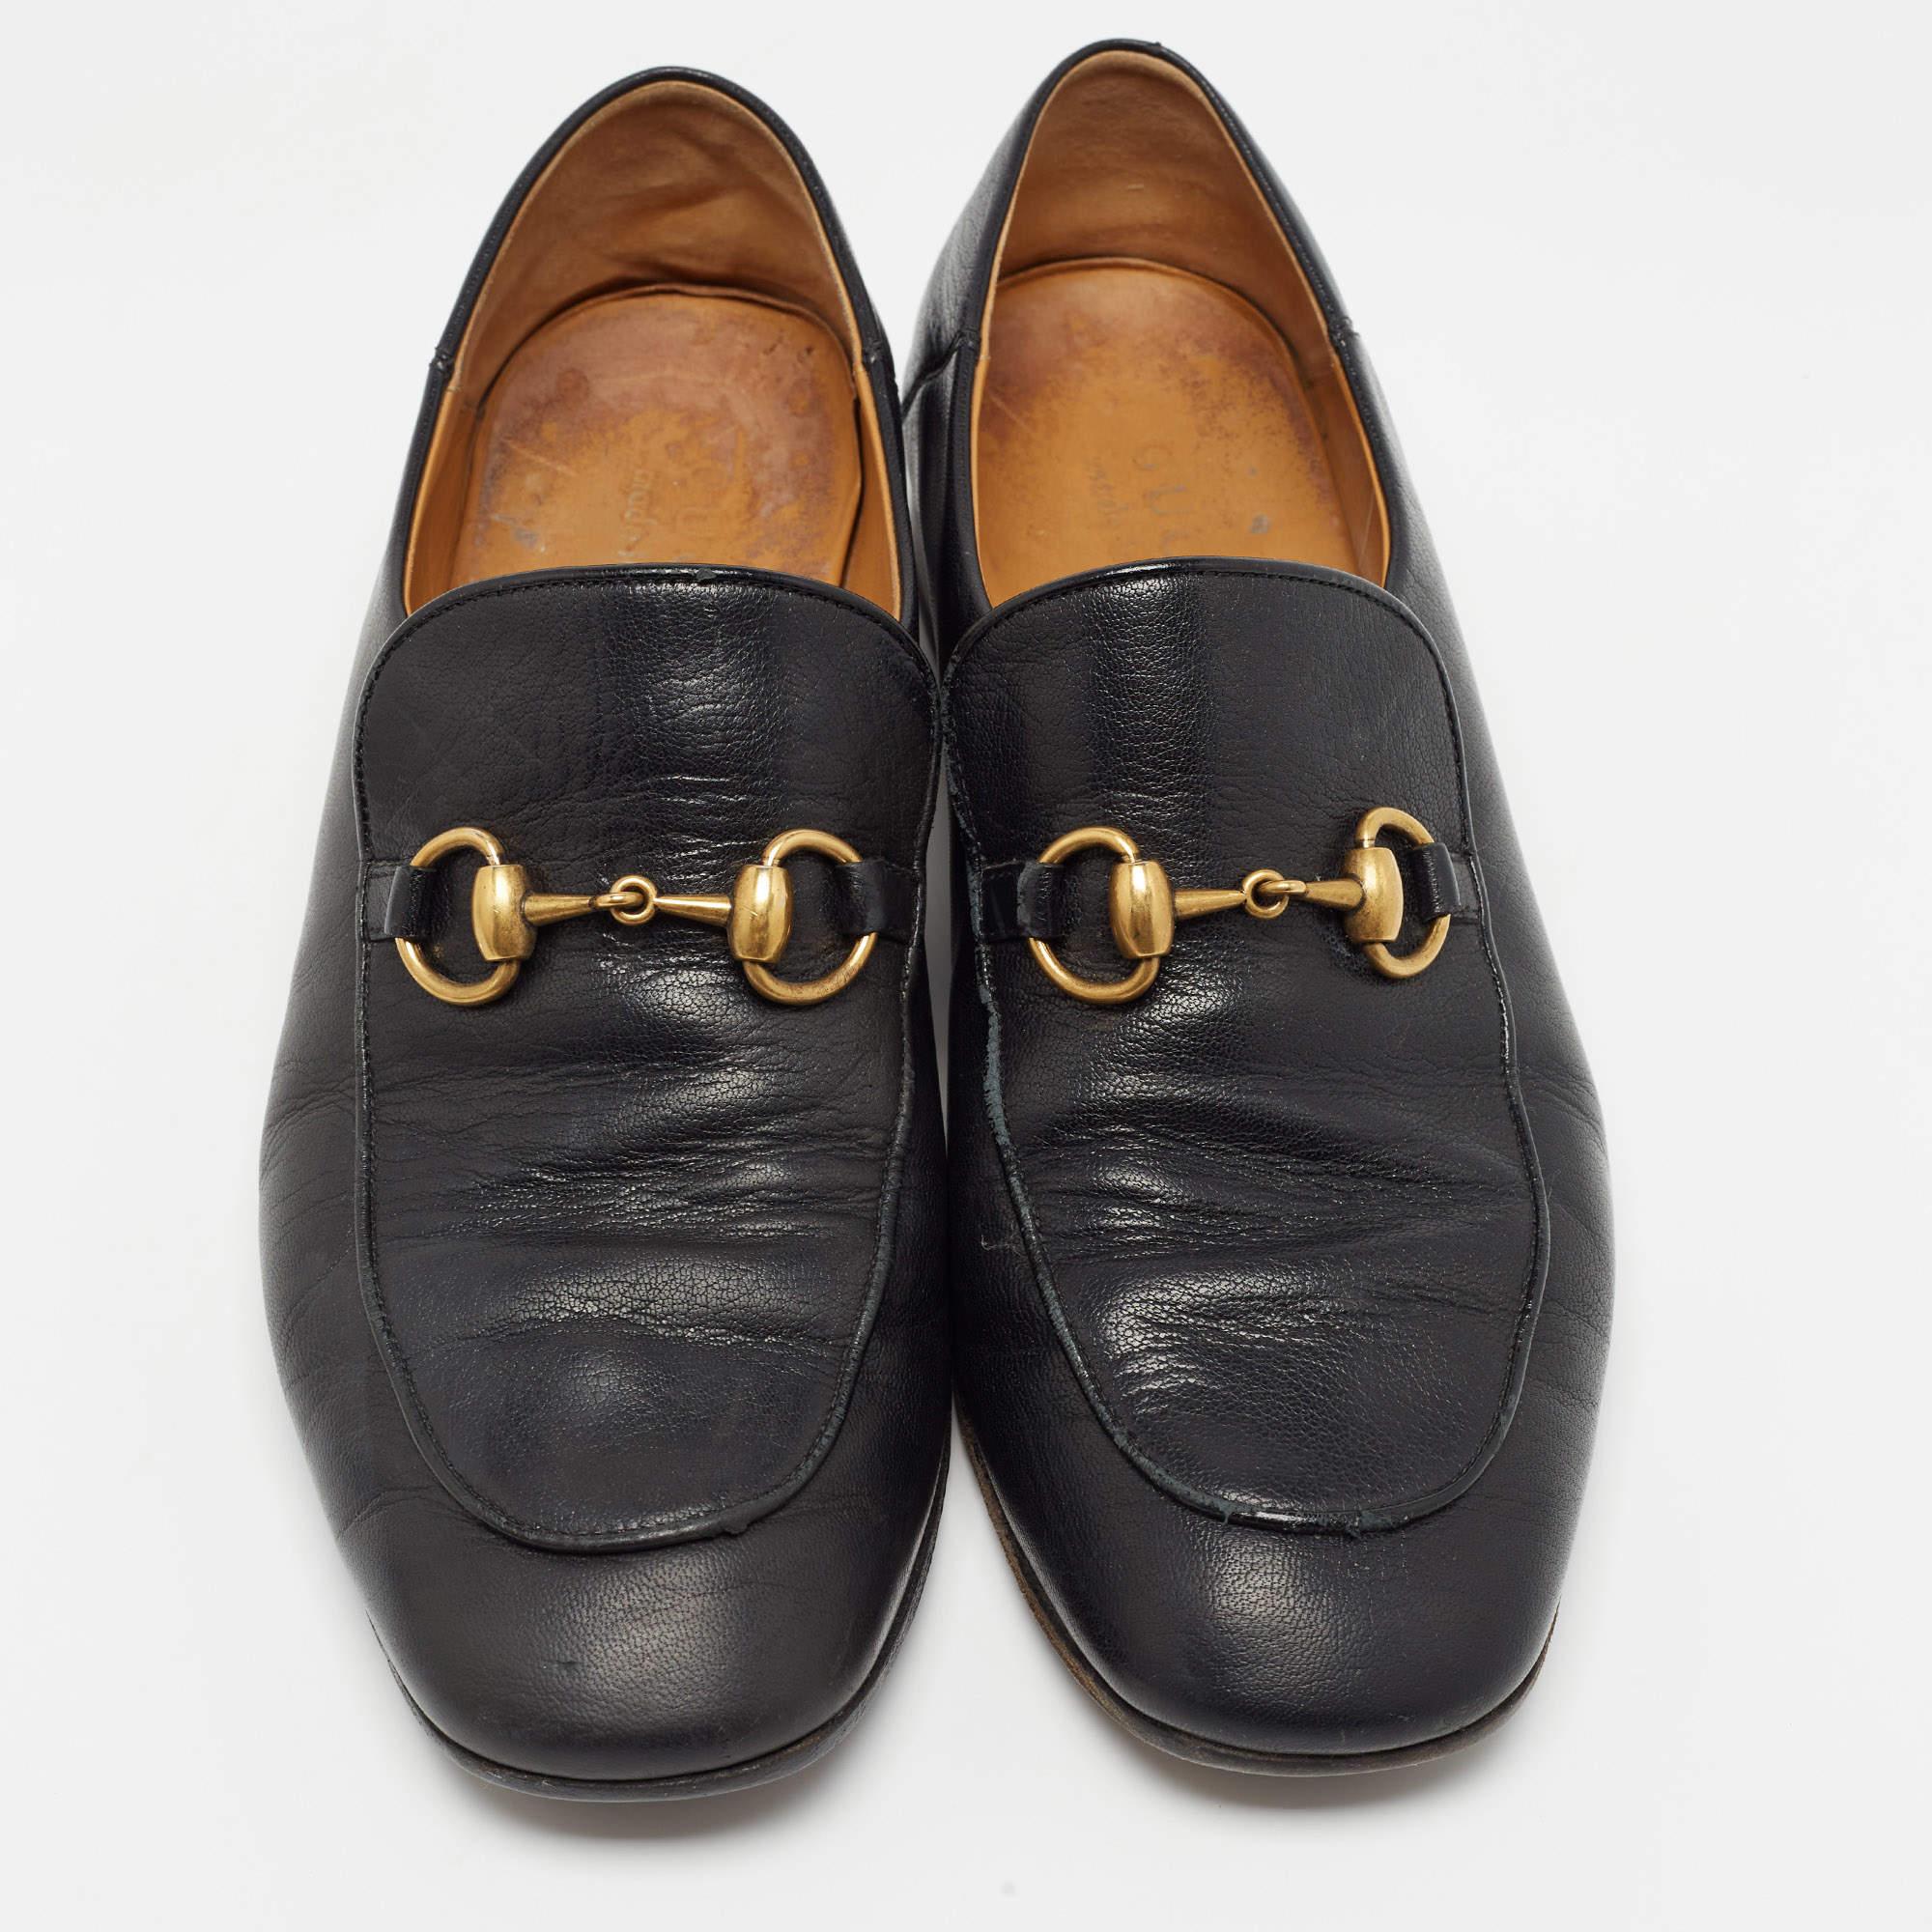 Practical, fashionable, and durable—these Gucci Horsebit 1953 loafers are carefully built to be fine companions to your everyday style. They come made using the best materials to be a prized buy.

